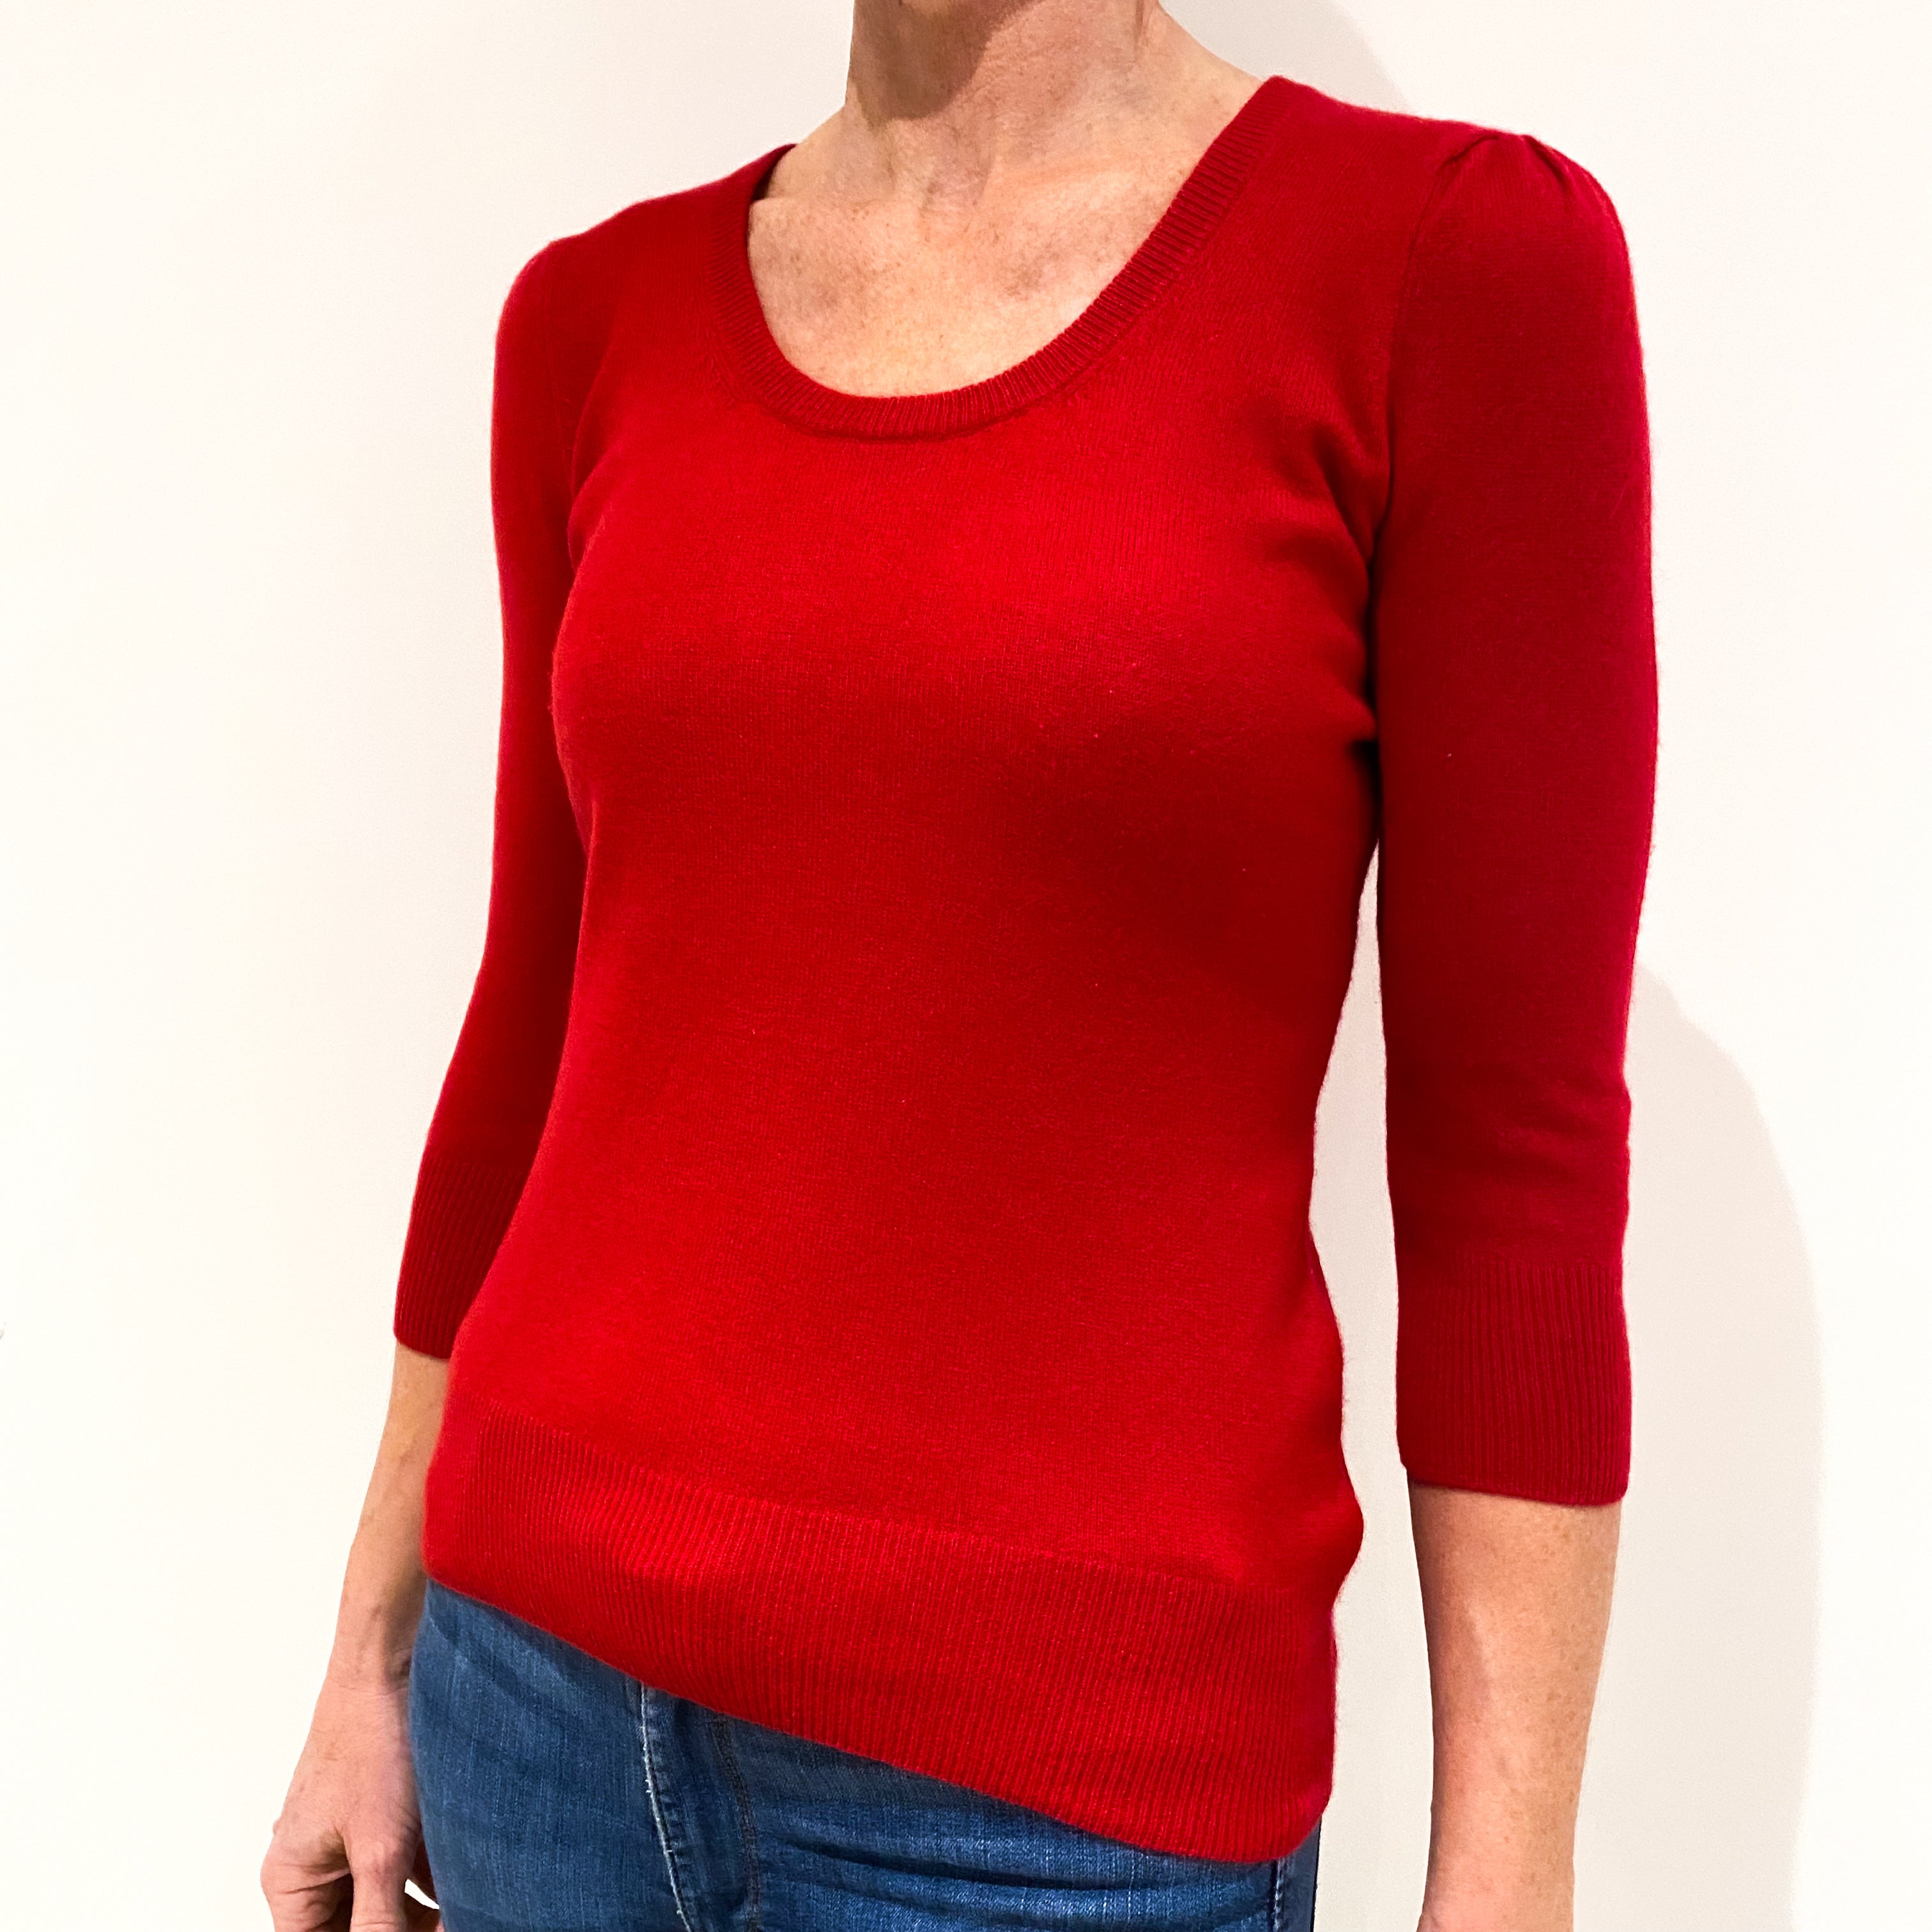 Scarlet Red 3/4 Sleeved Cashmere Crew Neck Jumper Small